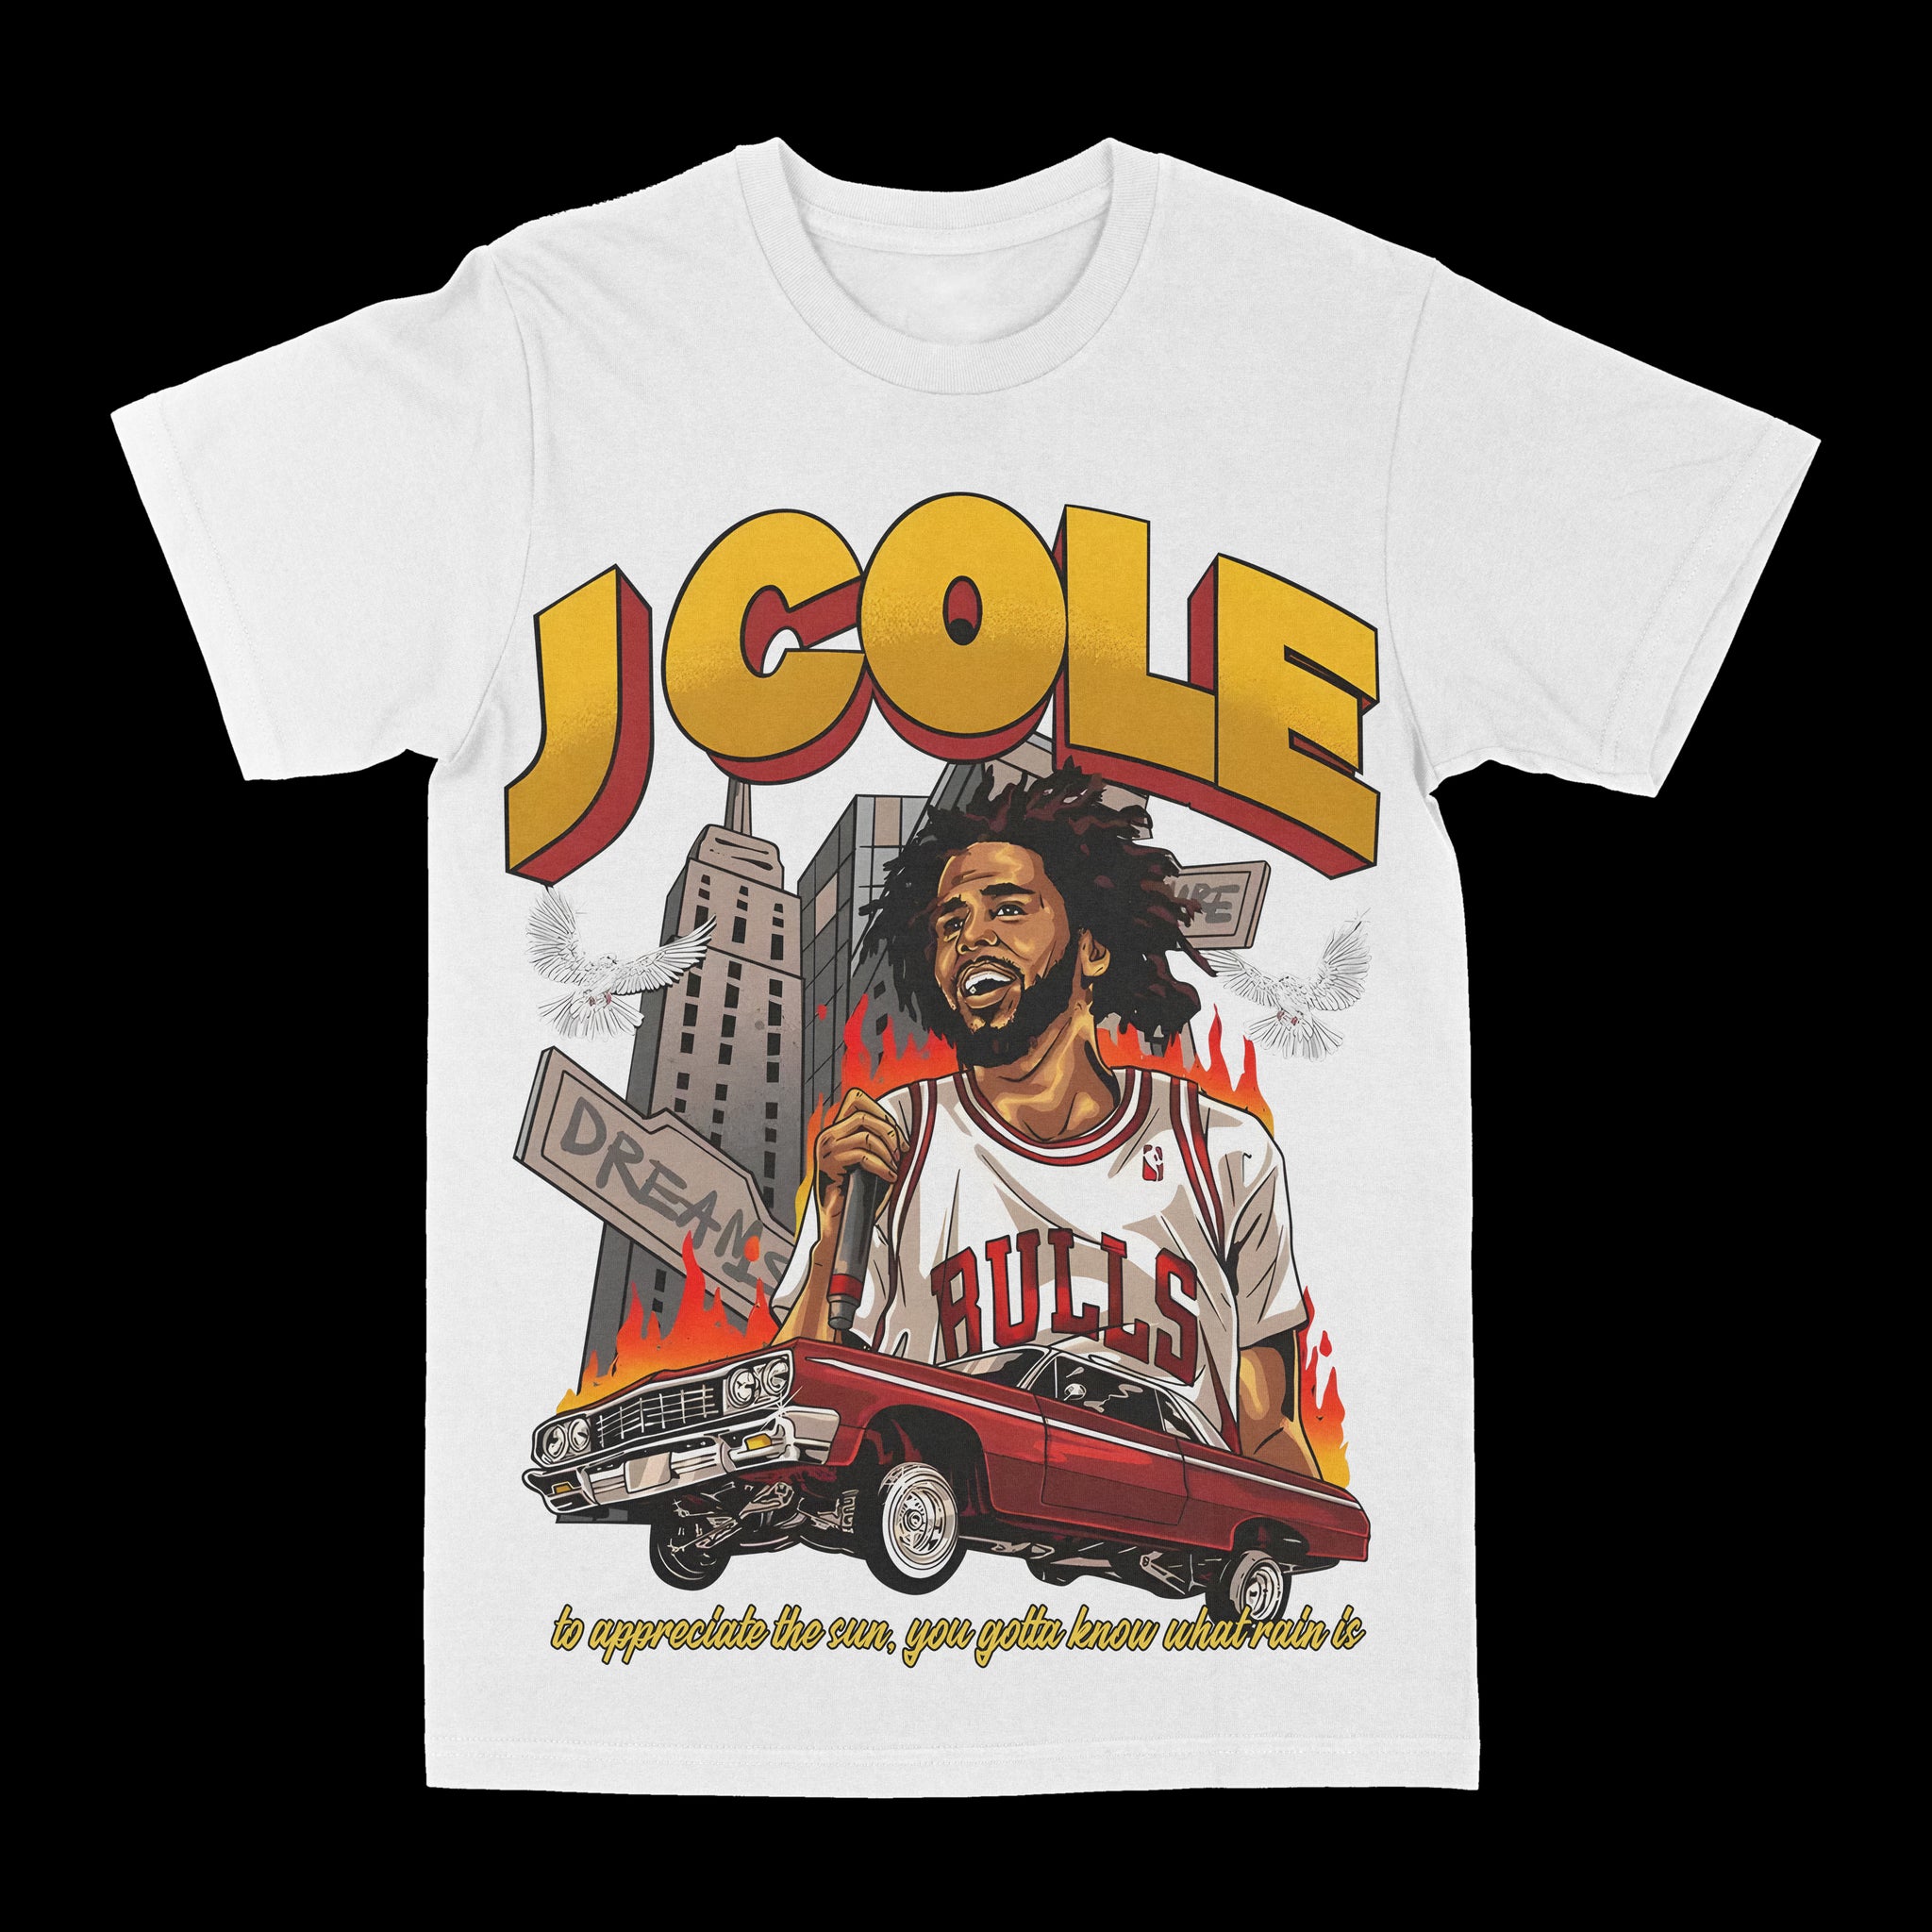 J. Cole "Chicago" Graphic Tee